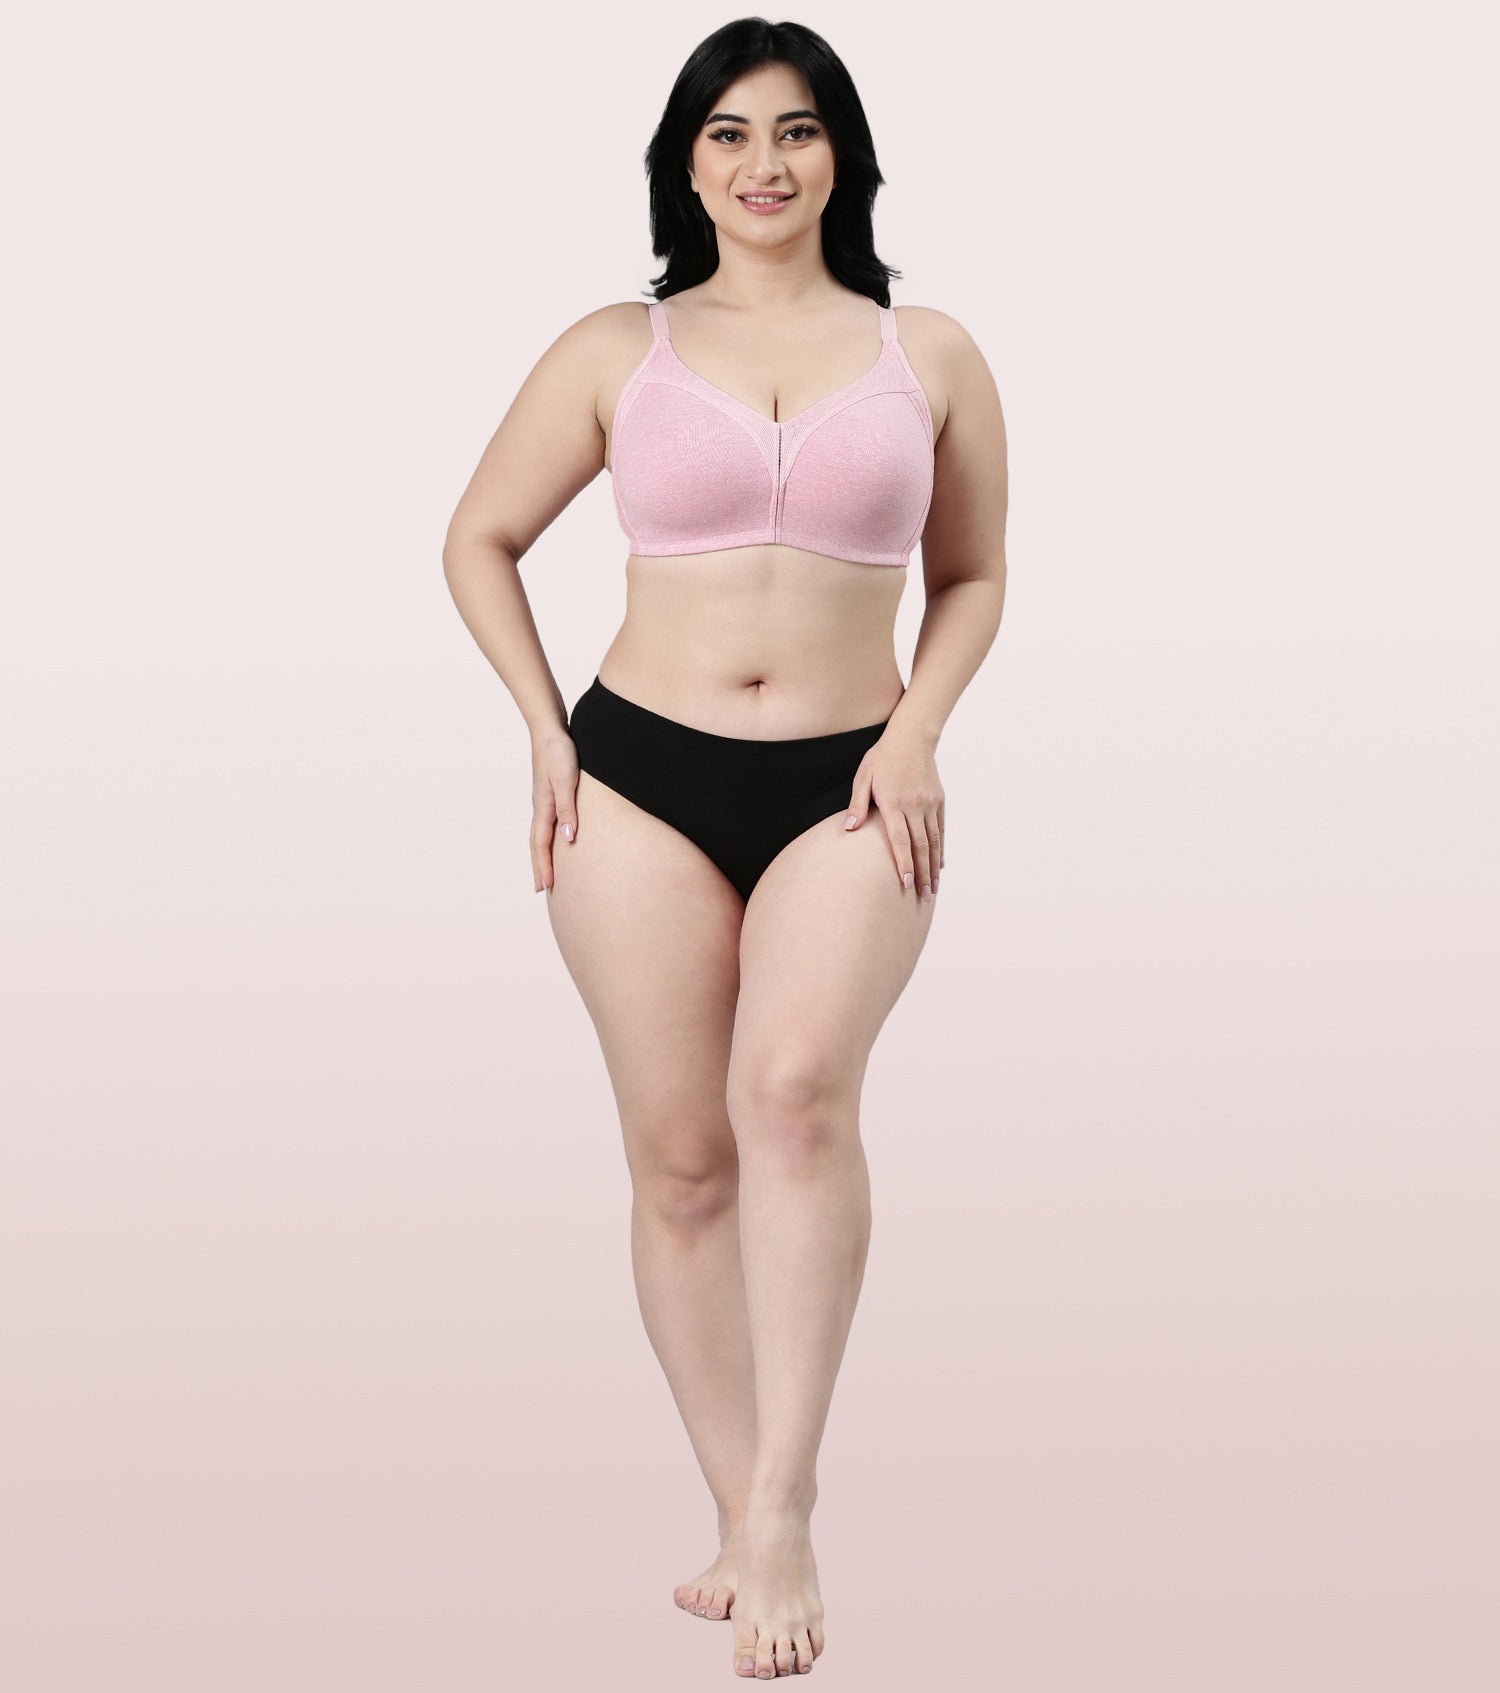 Enamor M-FrameJiggle Control Full Support Stretch Cotton Bra For Women - Non-Padded, Non-Wired Bra With Cooling Cotton Fabric | Orchid Melange | AB75